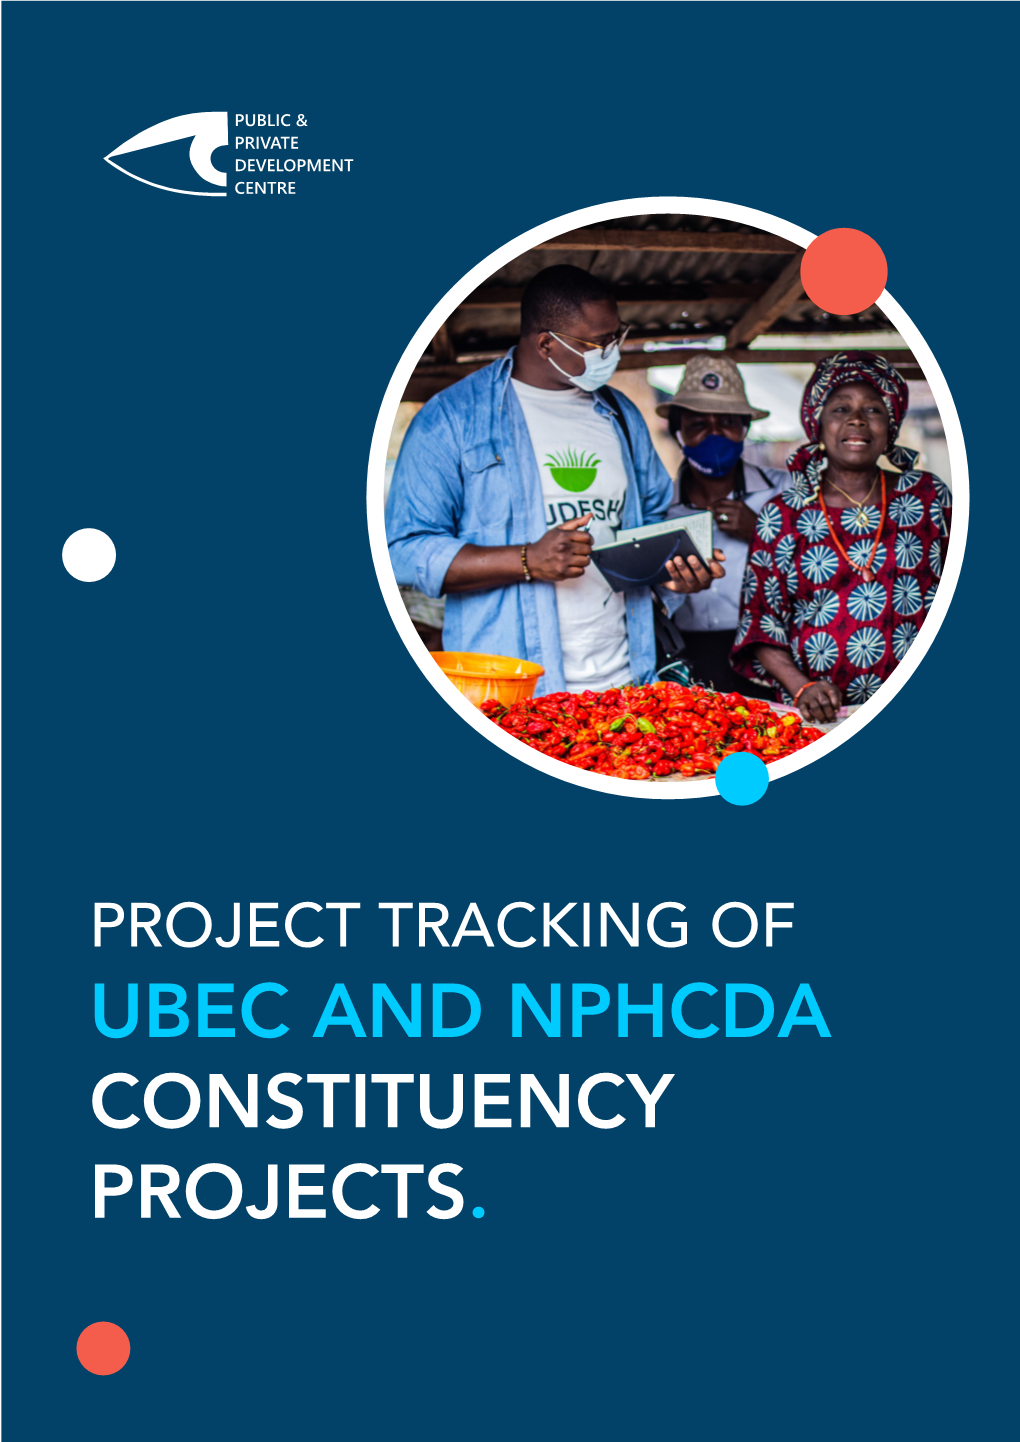 UBEC and NPHCDA CONSTITUENCY PROJECTS. Project Tracking Report 2 ABOUT PPDC